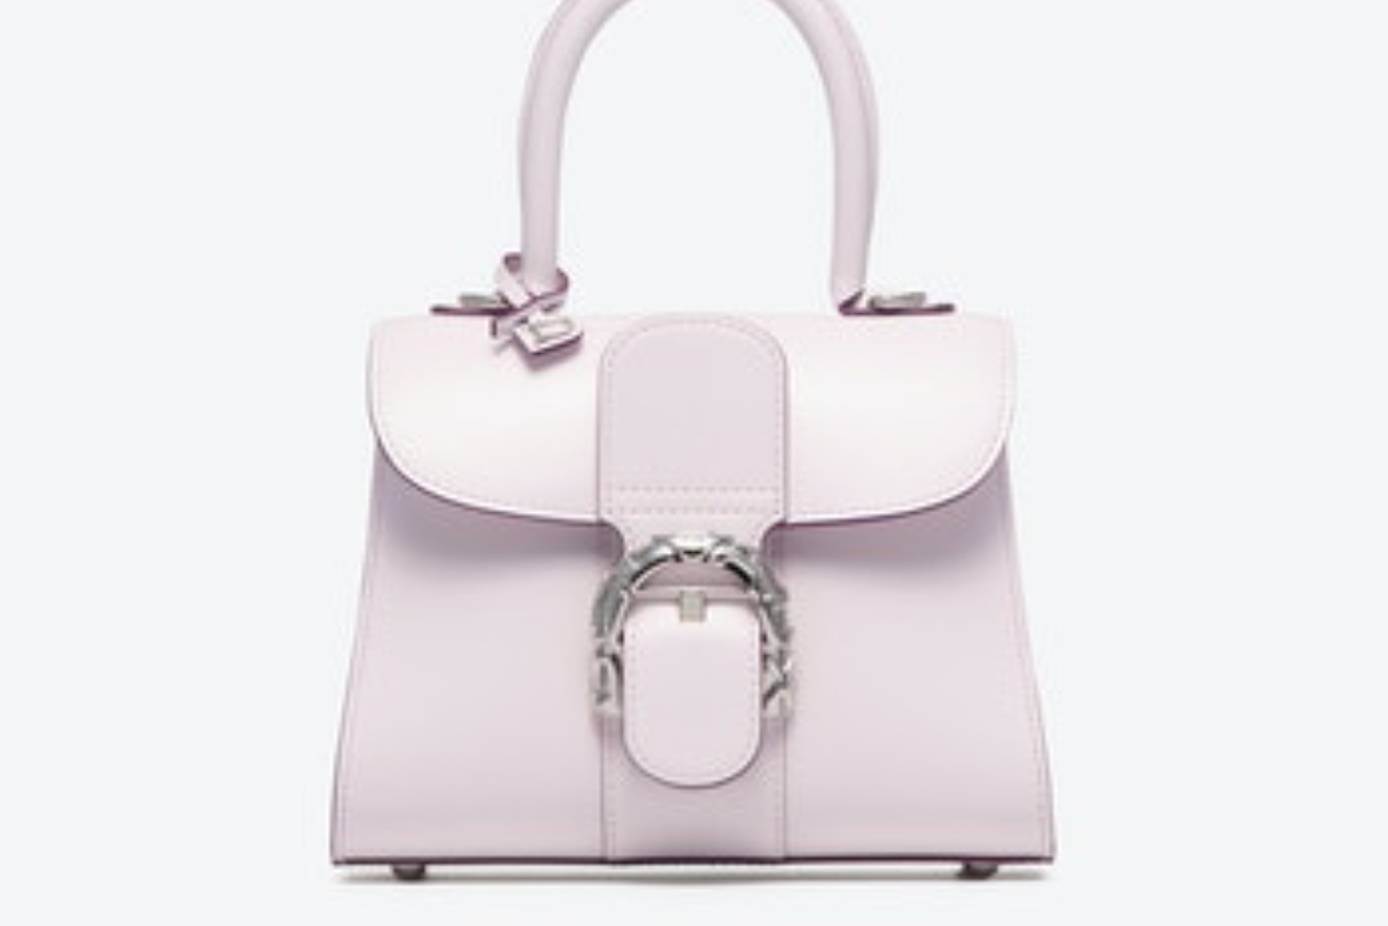 Why did Richemont just buy Delvaux? The luxury leather handbag